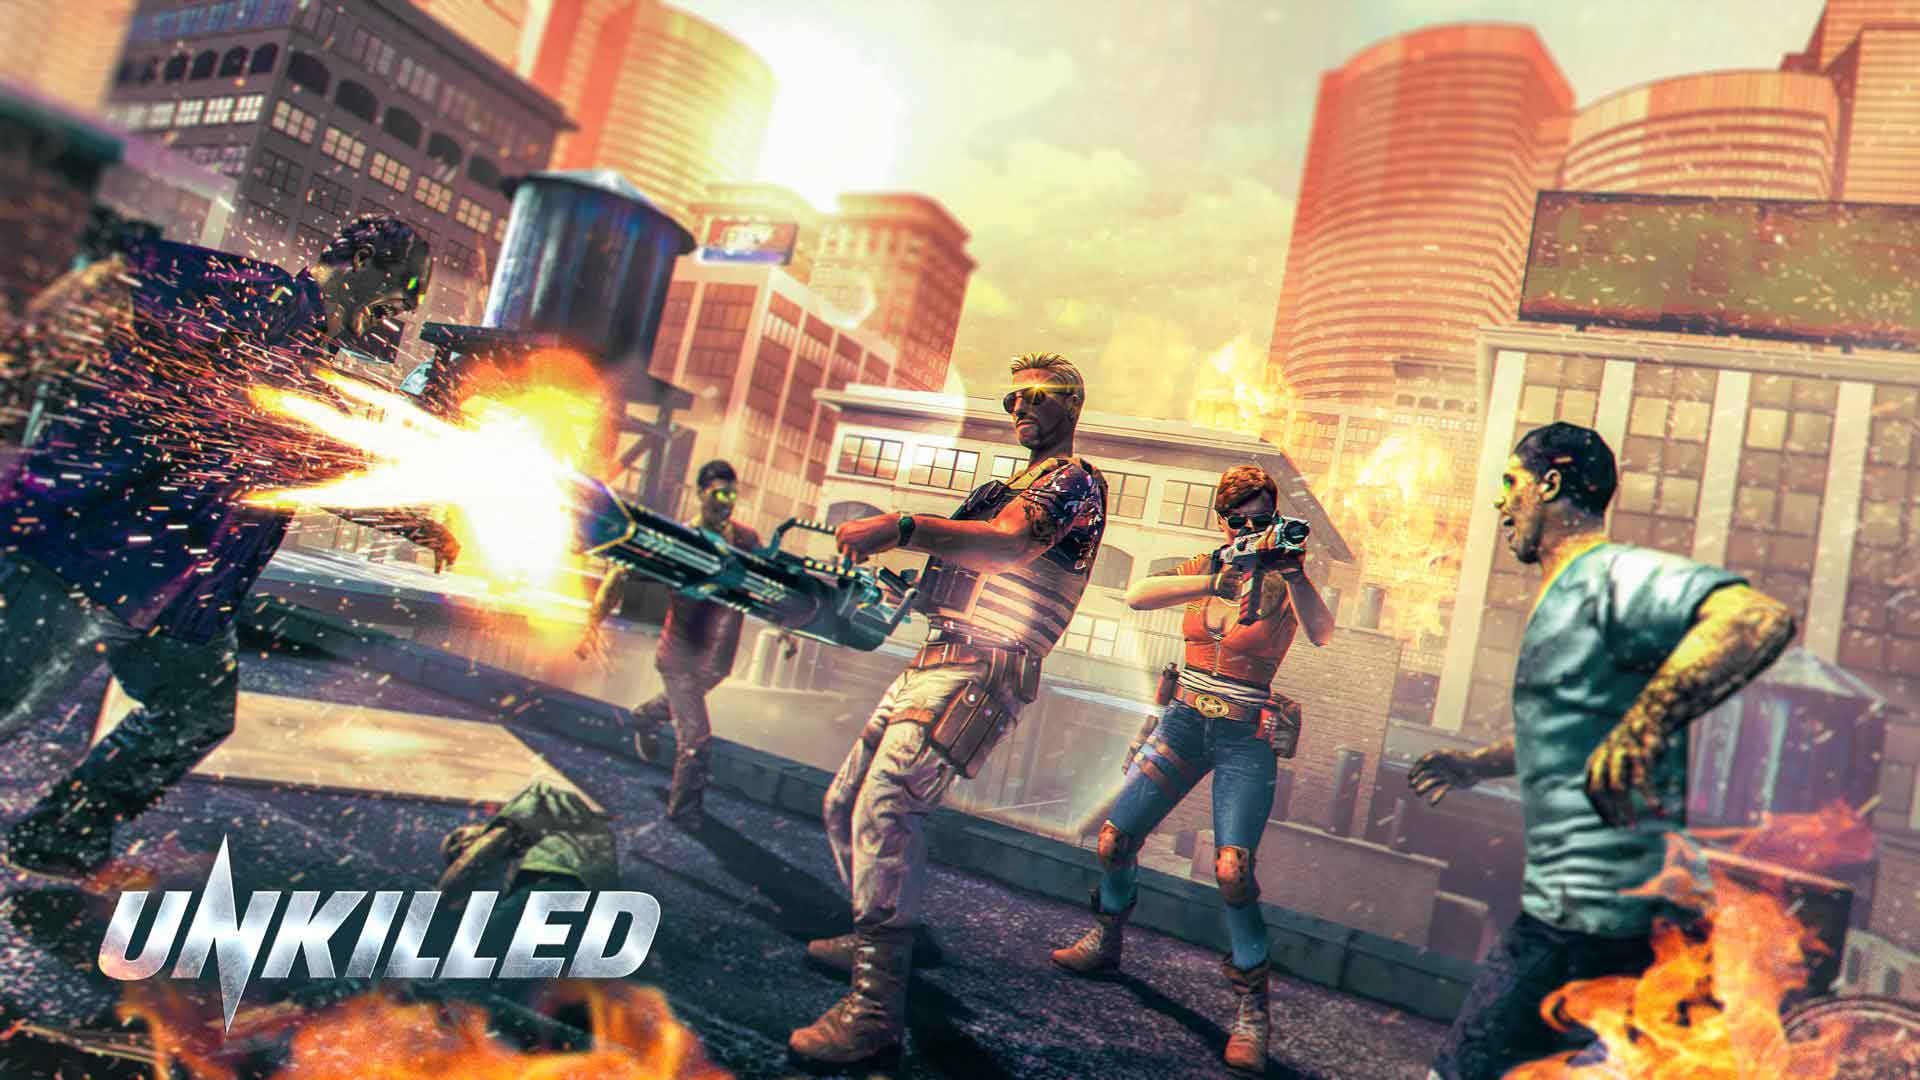 Android game Unkilled